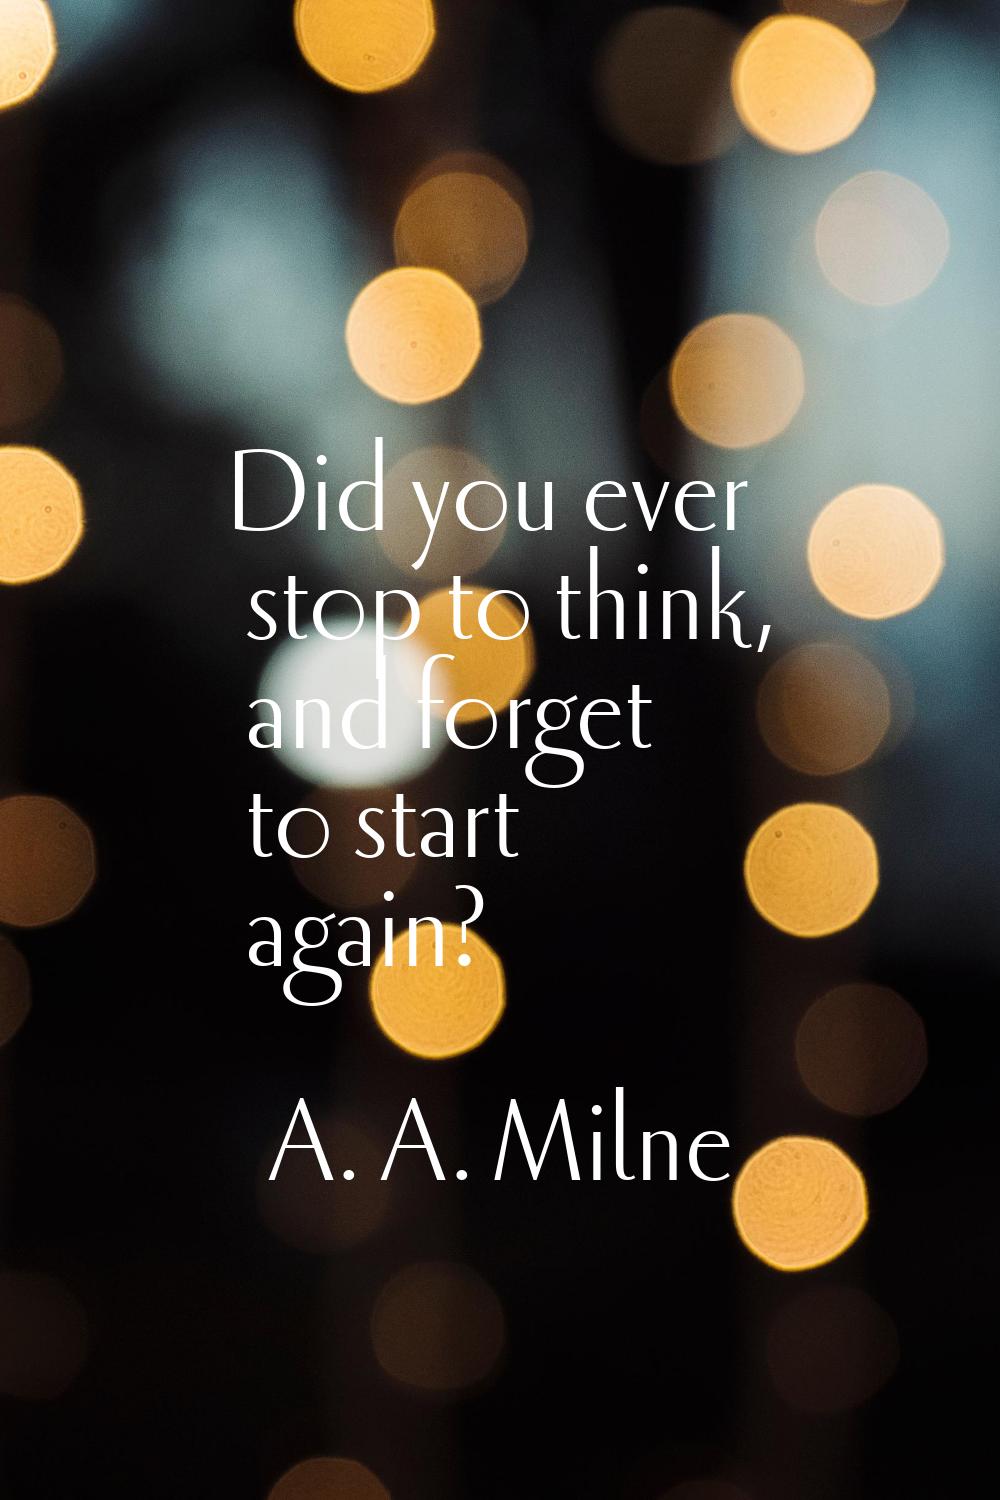 Did you ever stop to think, and forget to start again?